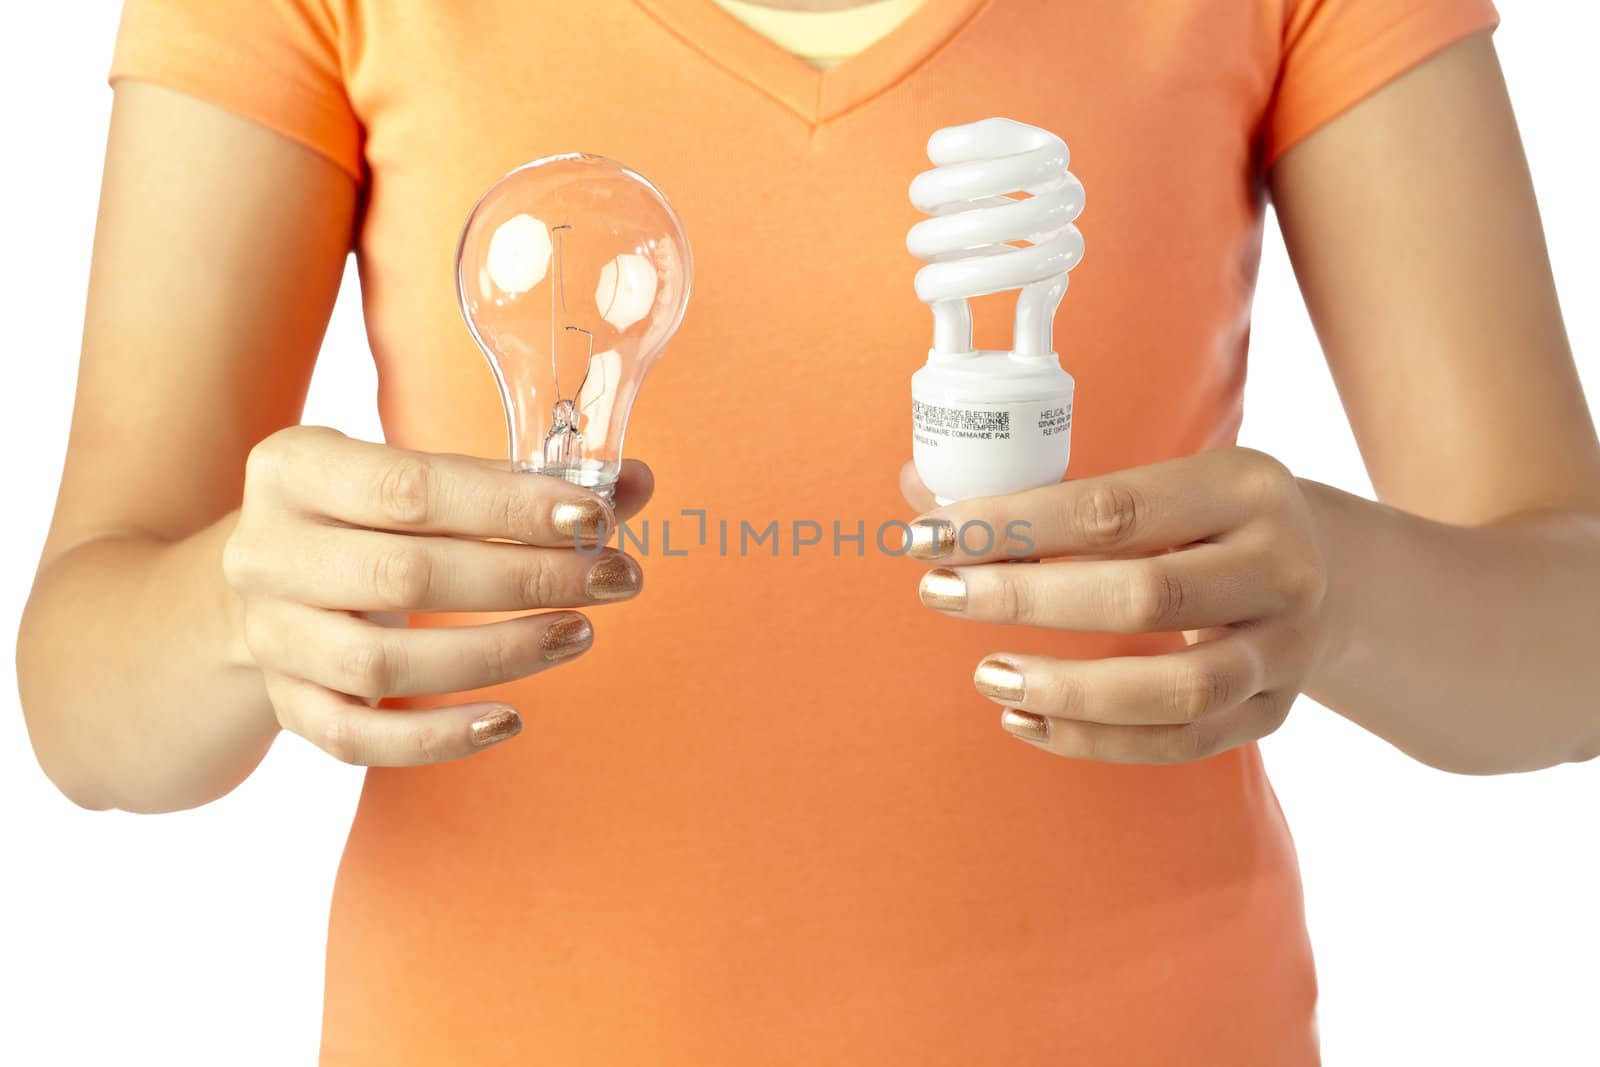 Close up image of human hand holding two different kinds of light bulbs against white background